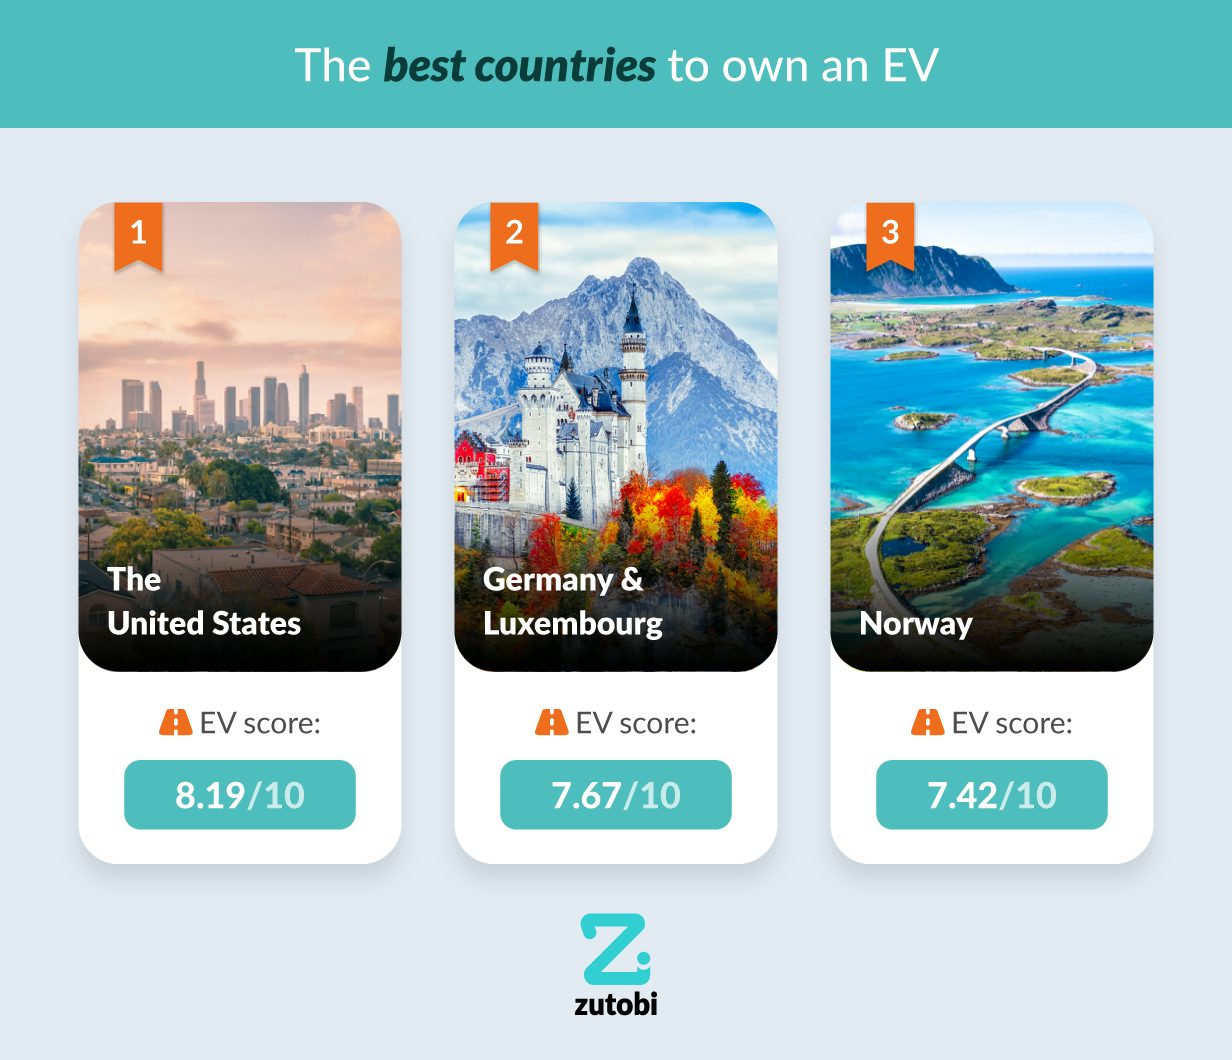 The best countries to own an EV